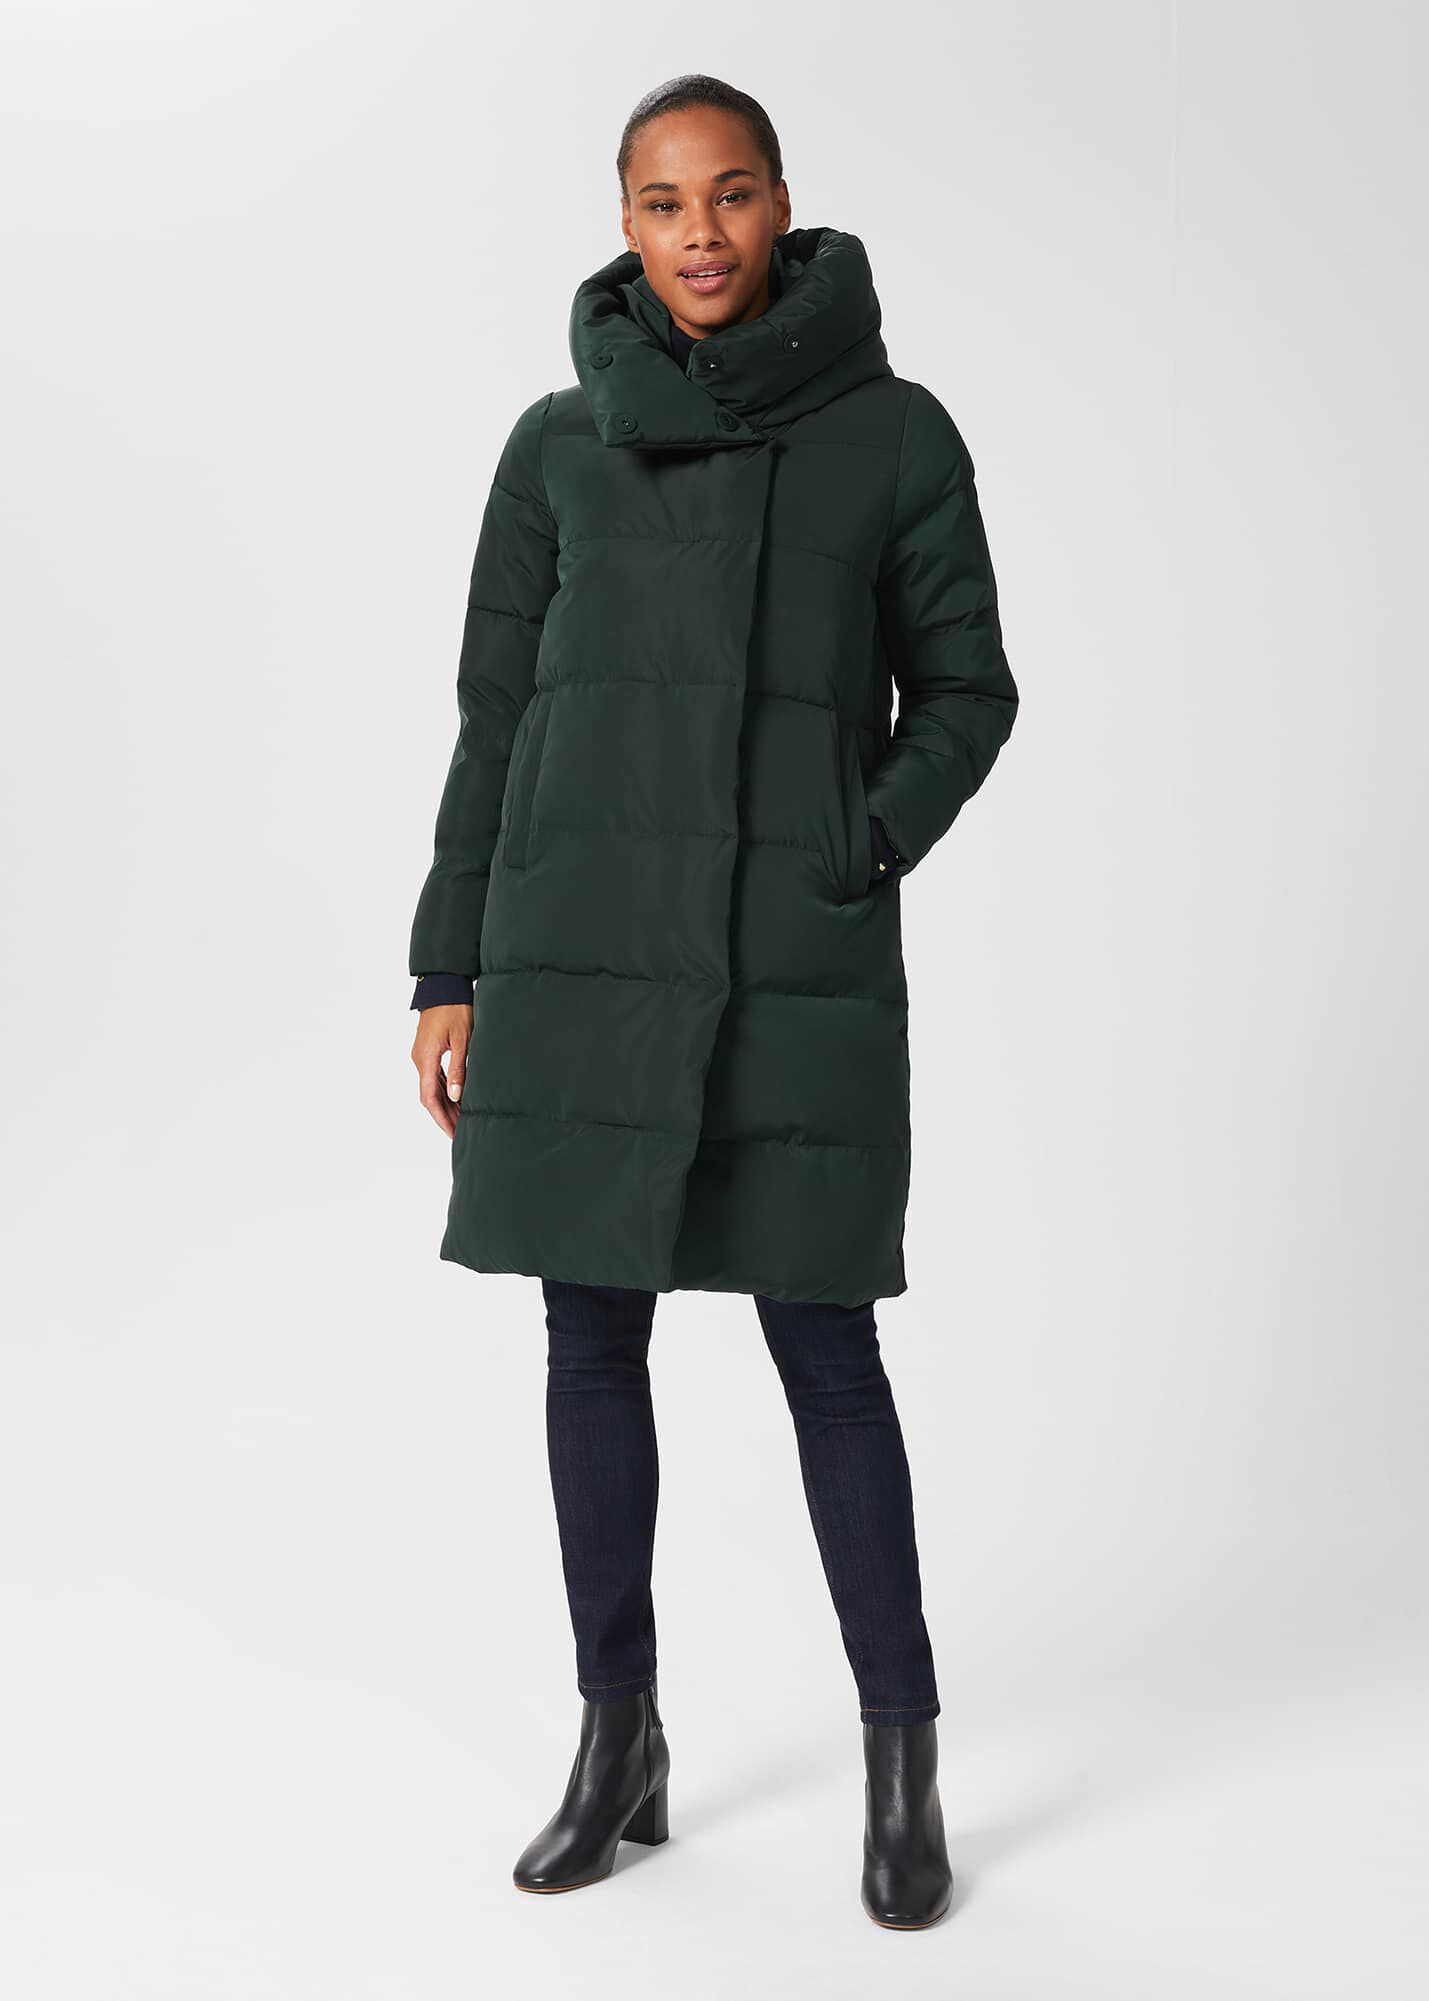 Women's Puffer Jackets| Padded, Quilted 